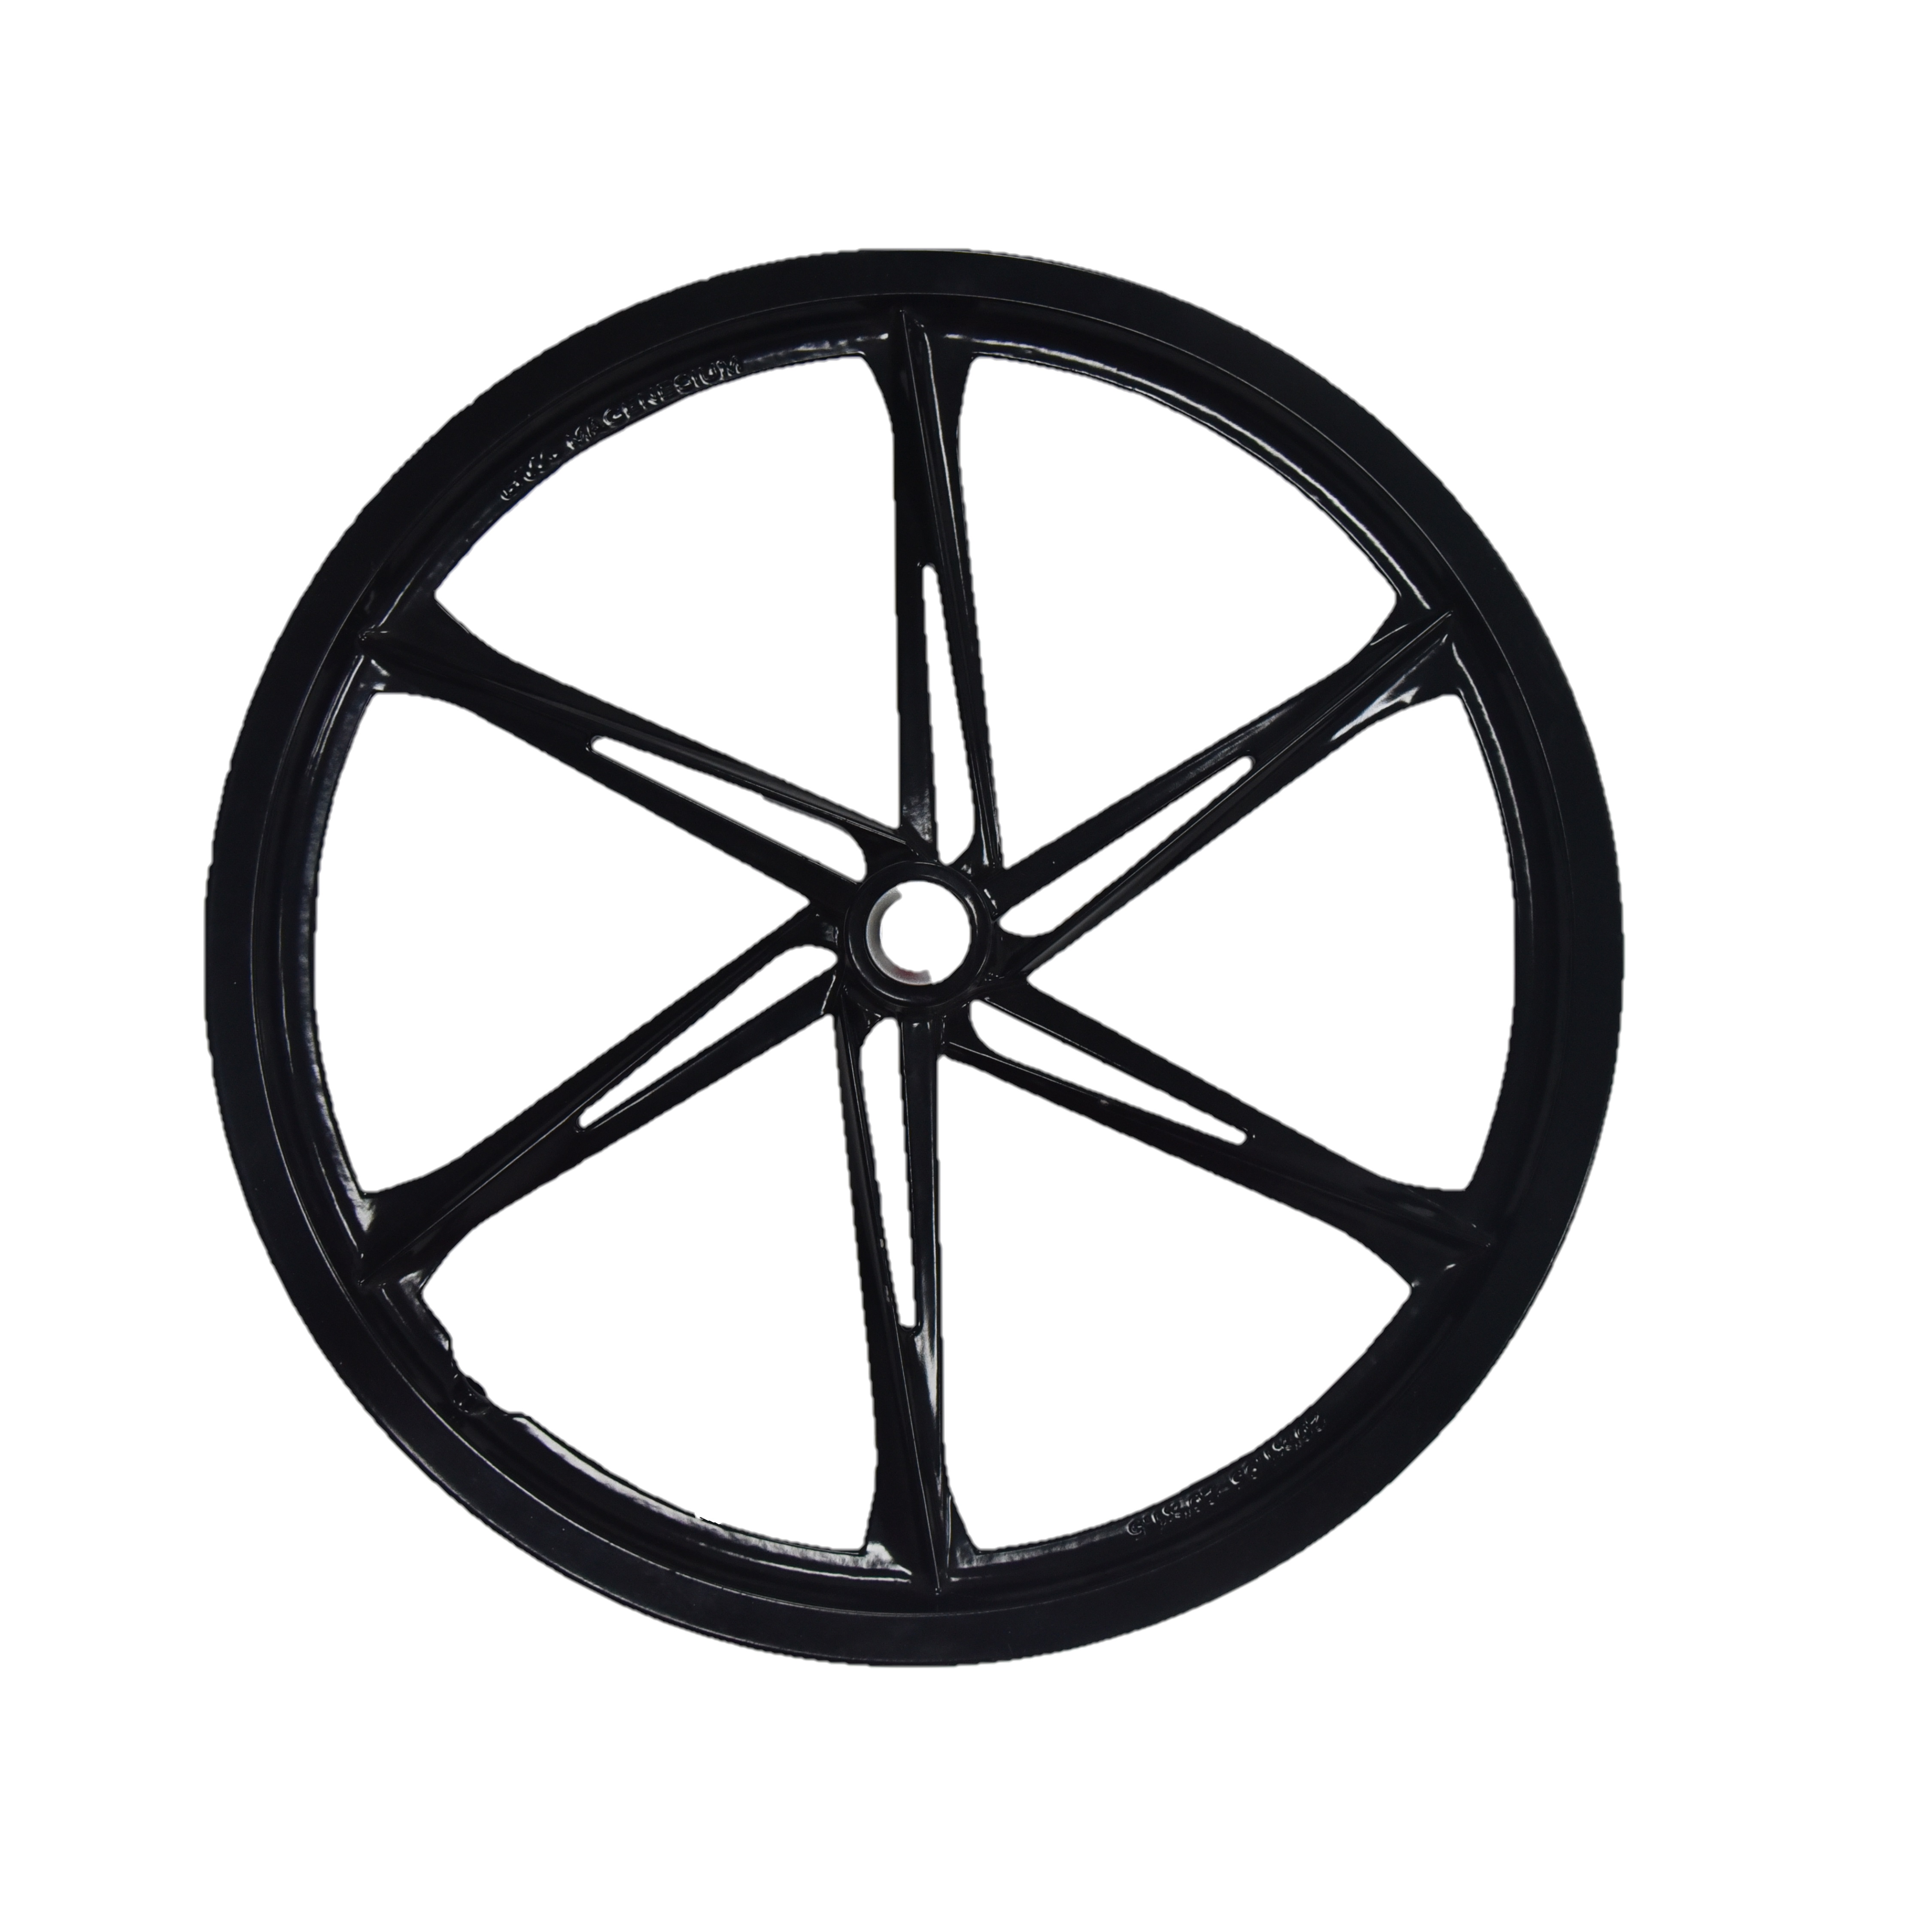 Custom-made foundry parts with CNC machining & surface treatement integrated wheel for bicycle